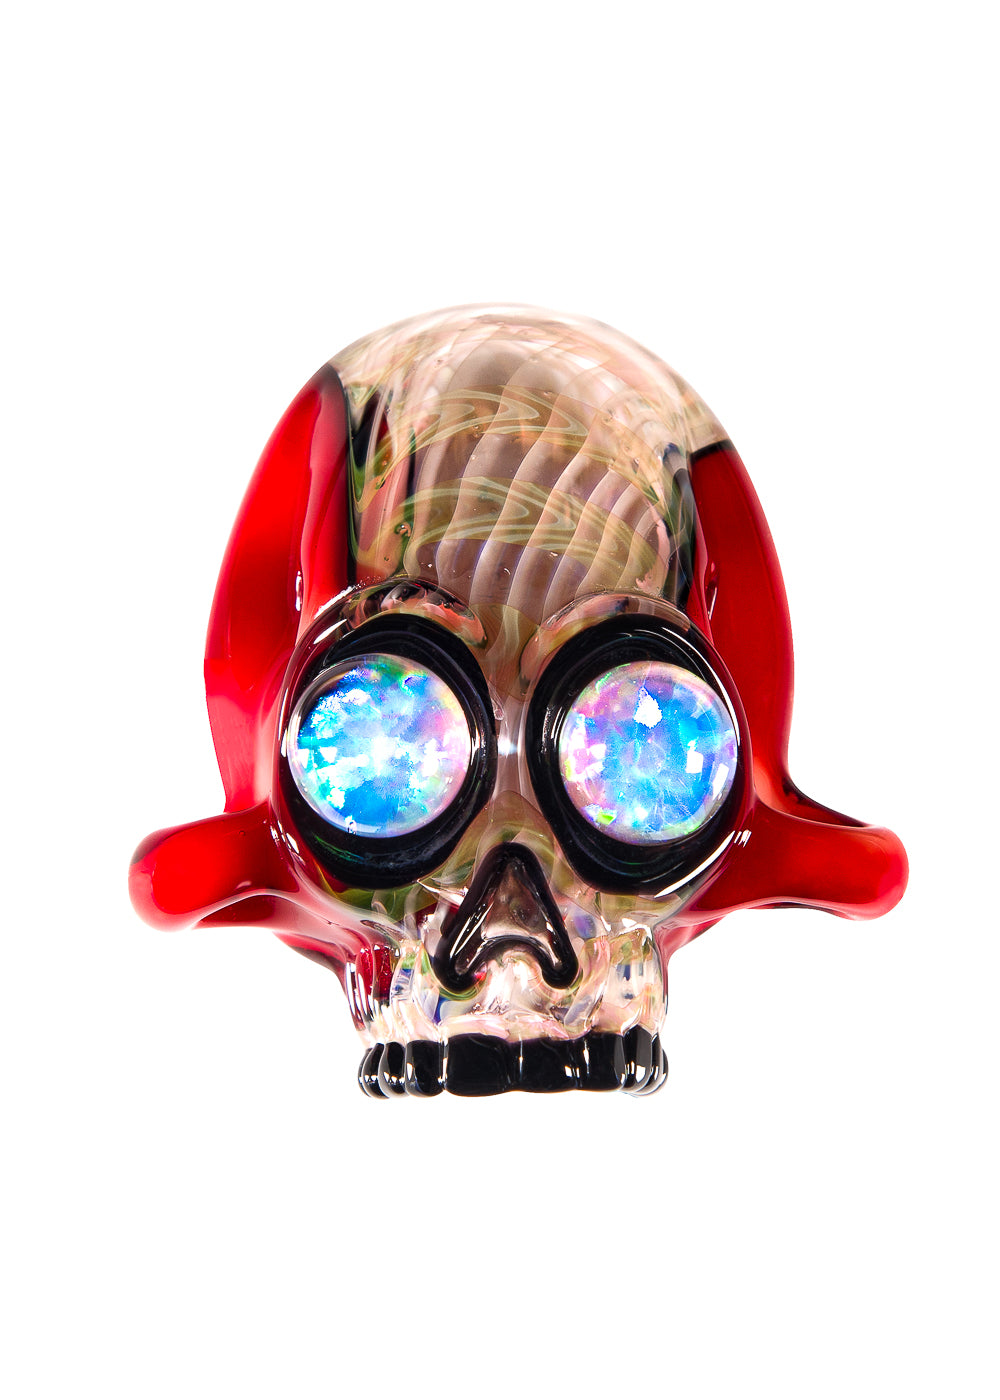 Rake and Fumed with Red Skull Pendant Collaboration by AKM and JD Maplesden